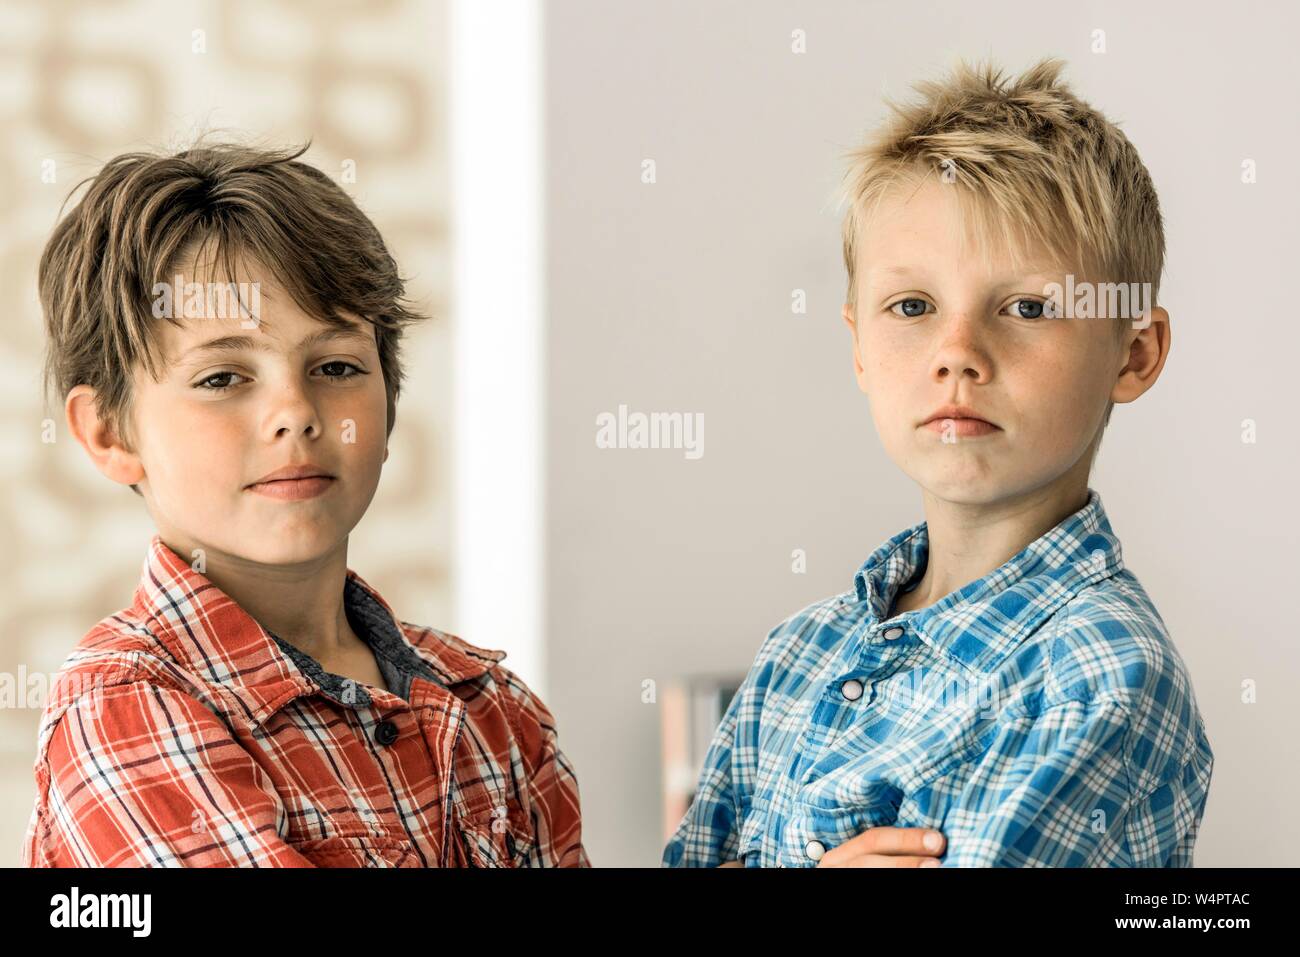 Two boys in plaid shirts, friends, 10 years old, looking cool into the camera, Germany Stock Photo